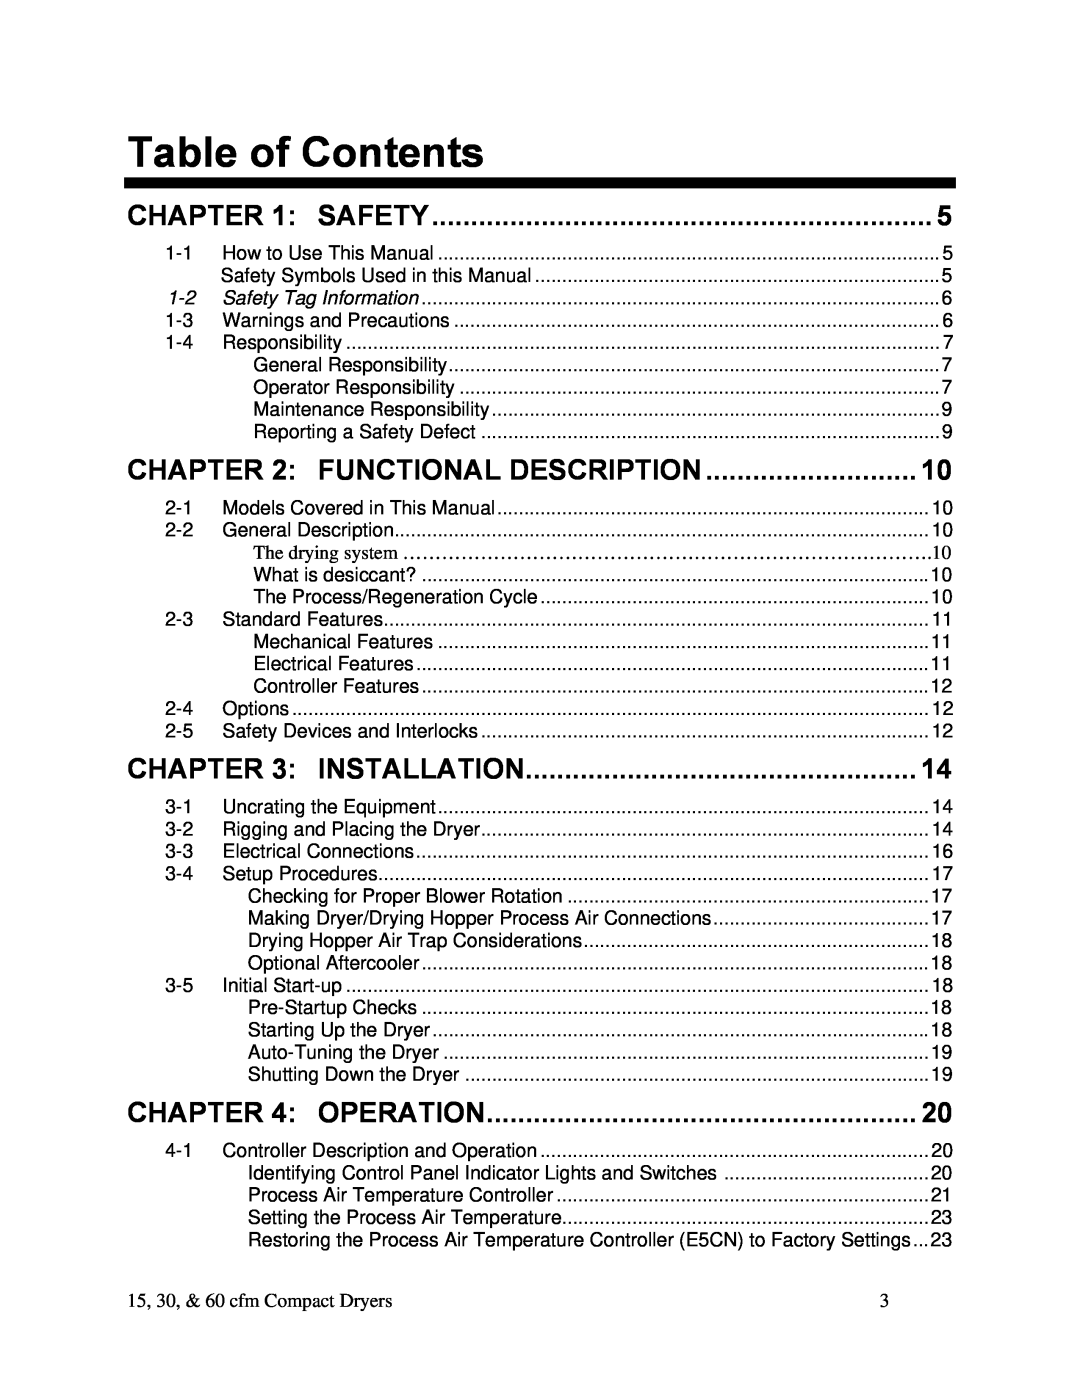 Sterling 882.00291.00 specifications Table of Contents, Functional Description, Installation, Operation, Safety 